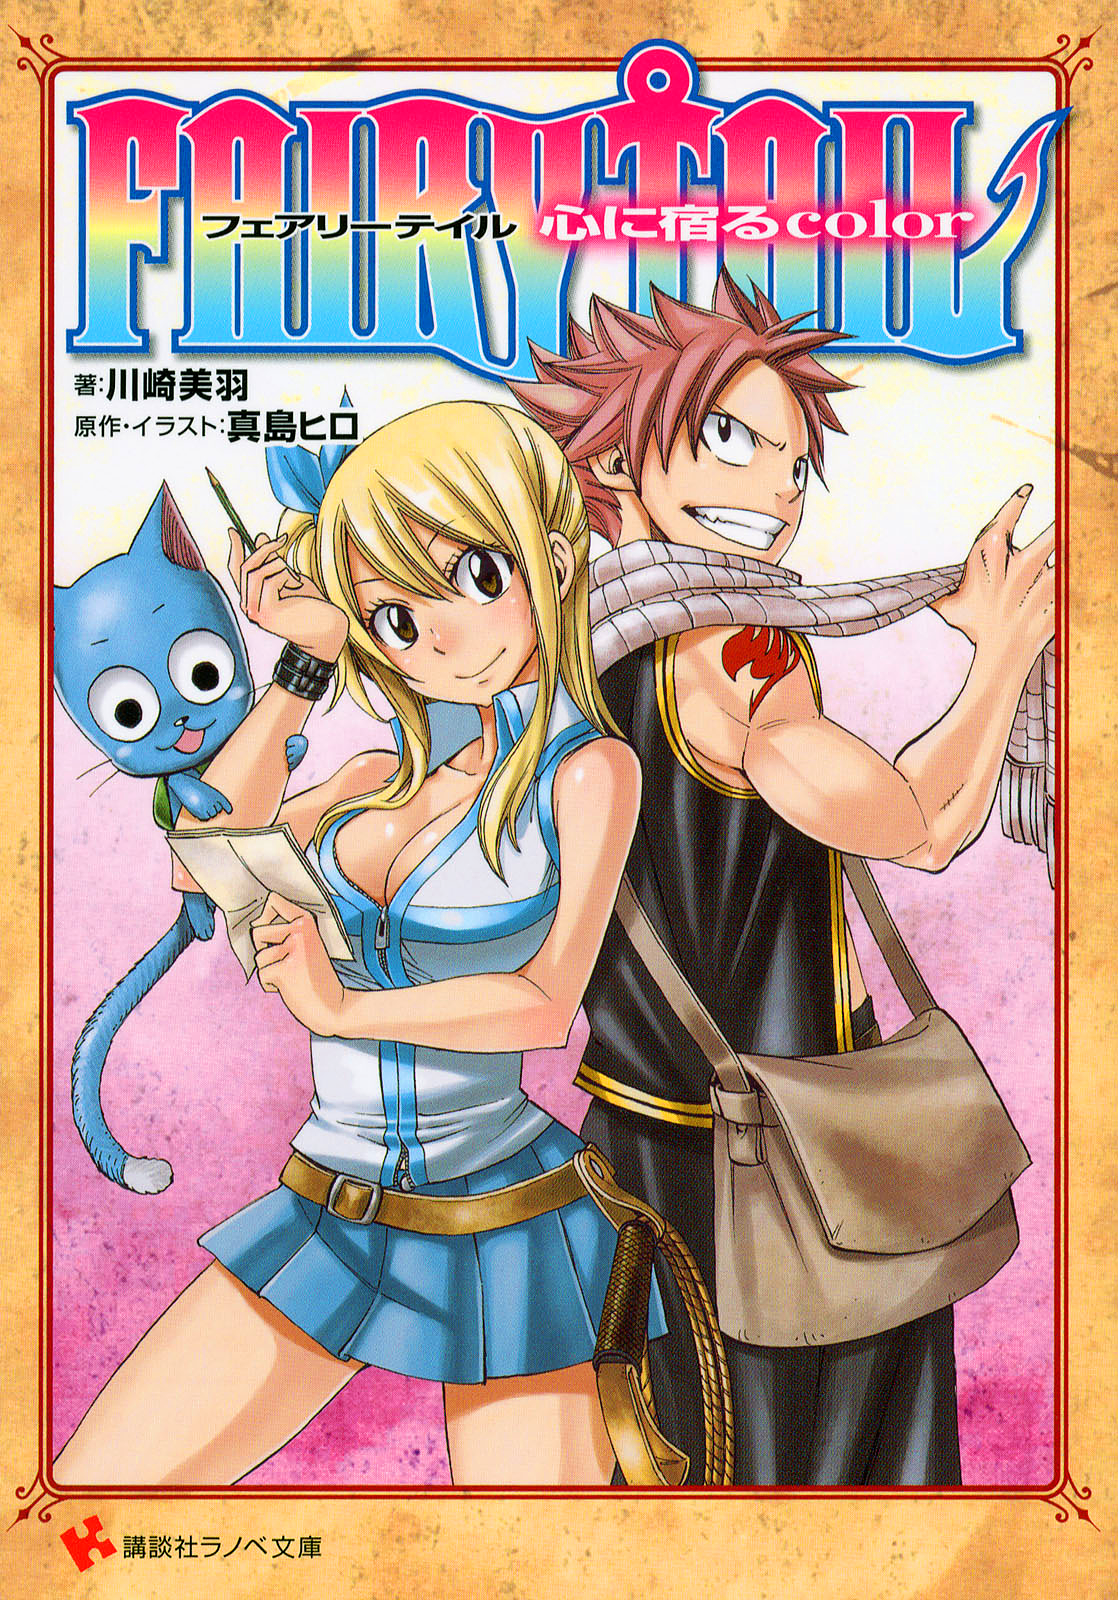 The Video Game Version Of Fairy Tail Would Be Released Worldwide In March  2020 Promises Faithful Recreation Of The Manga World